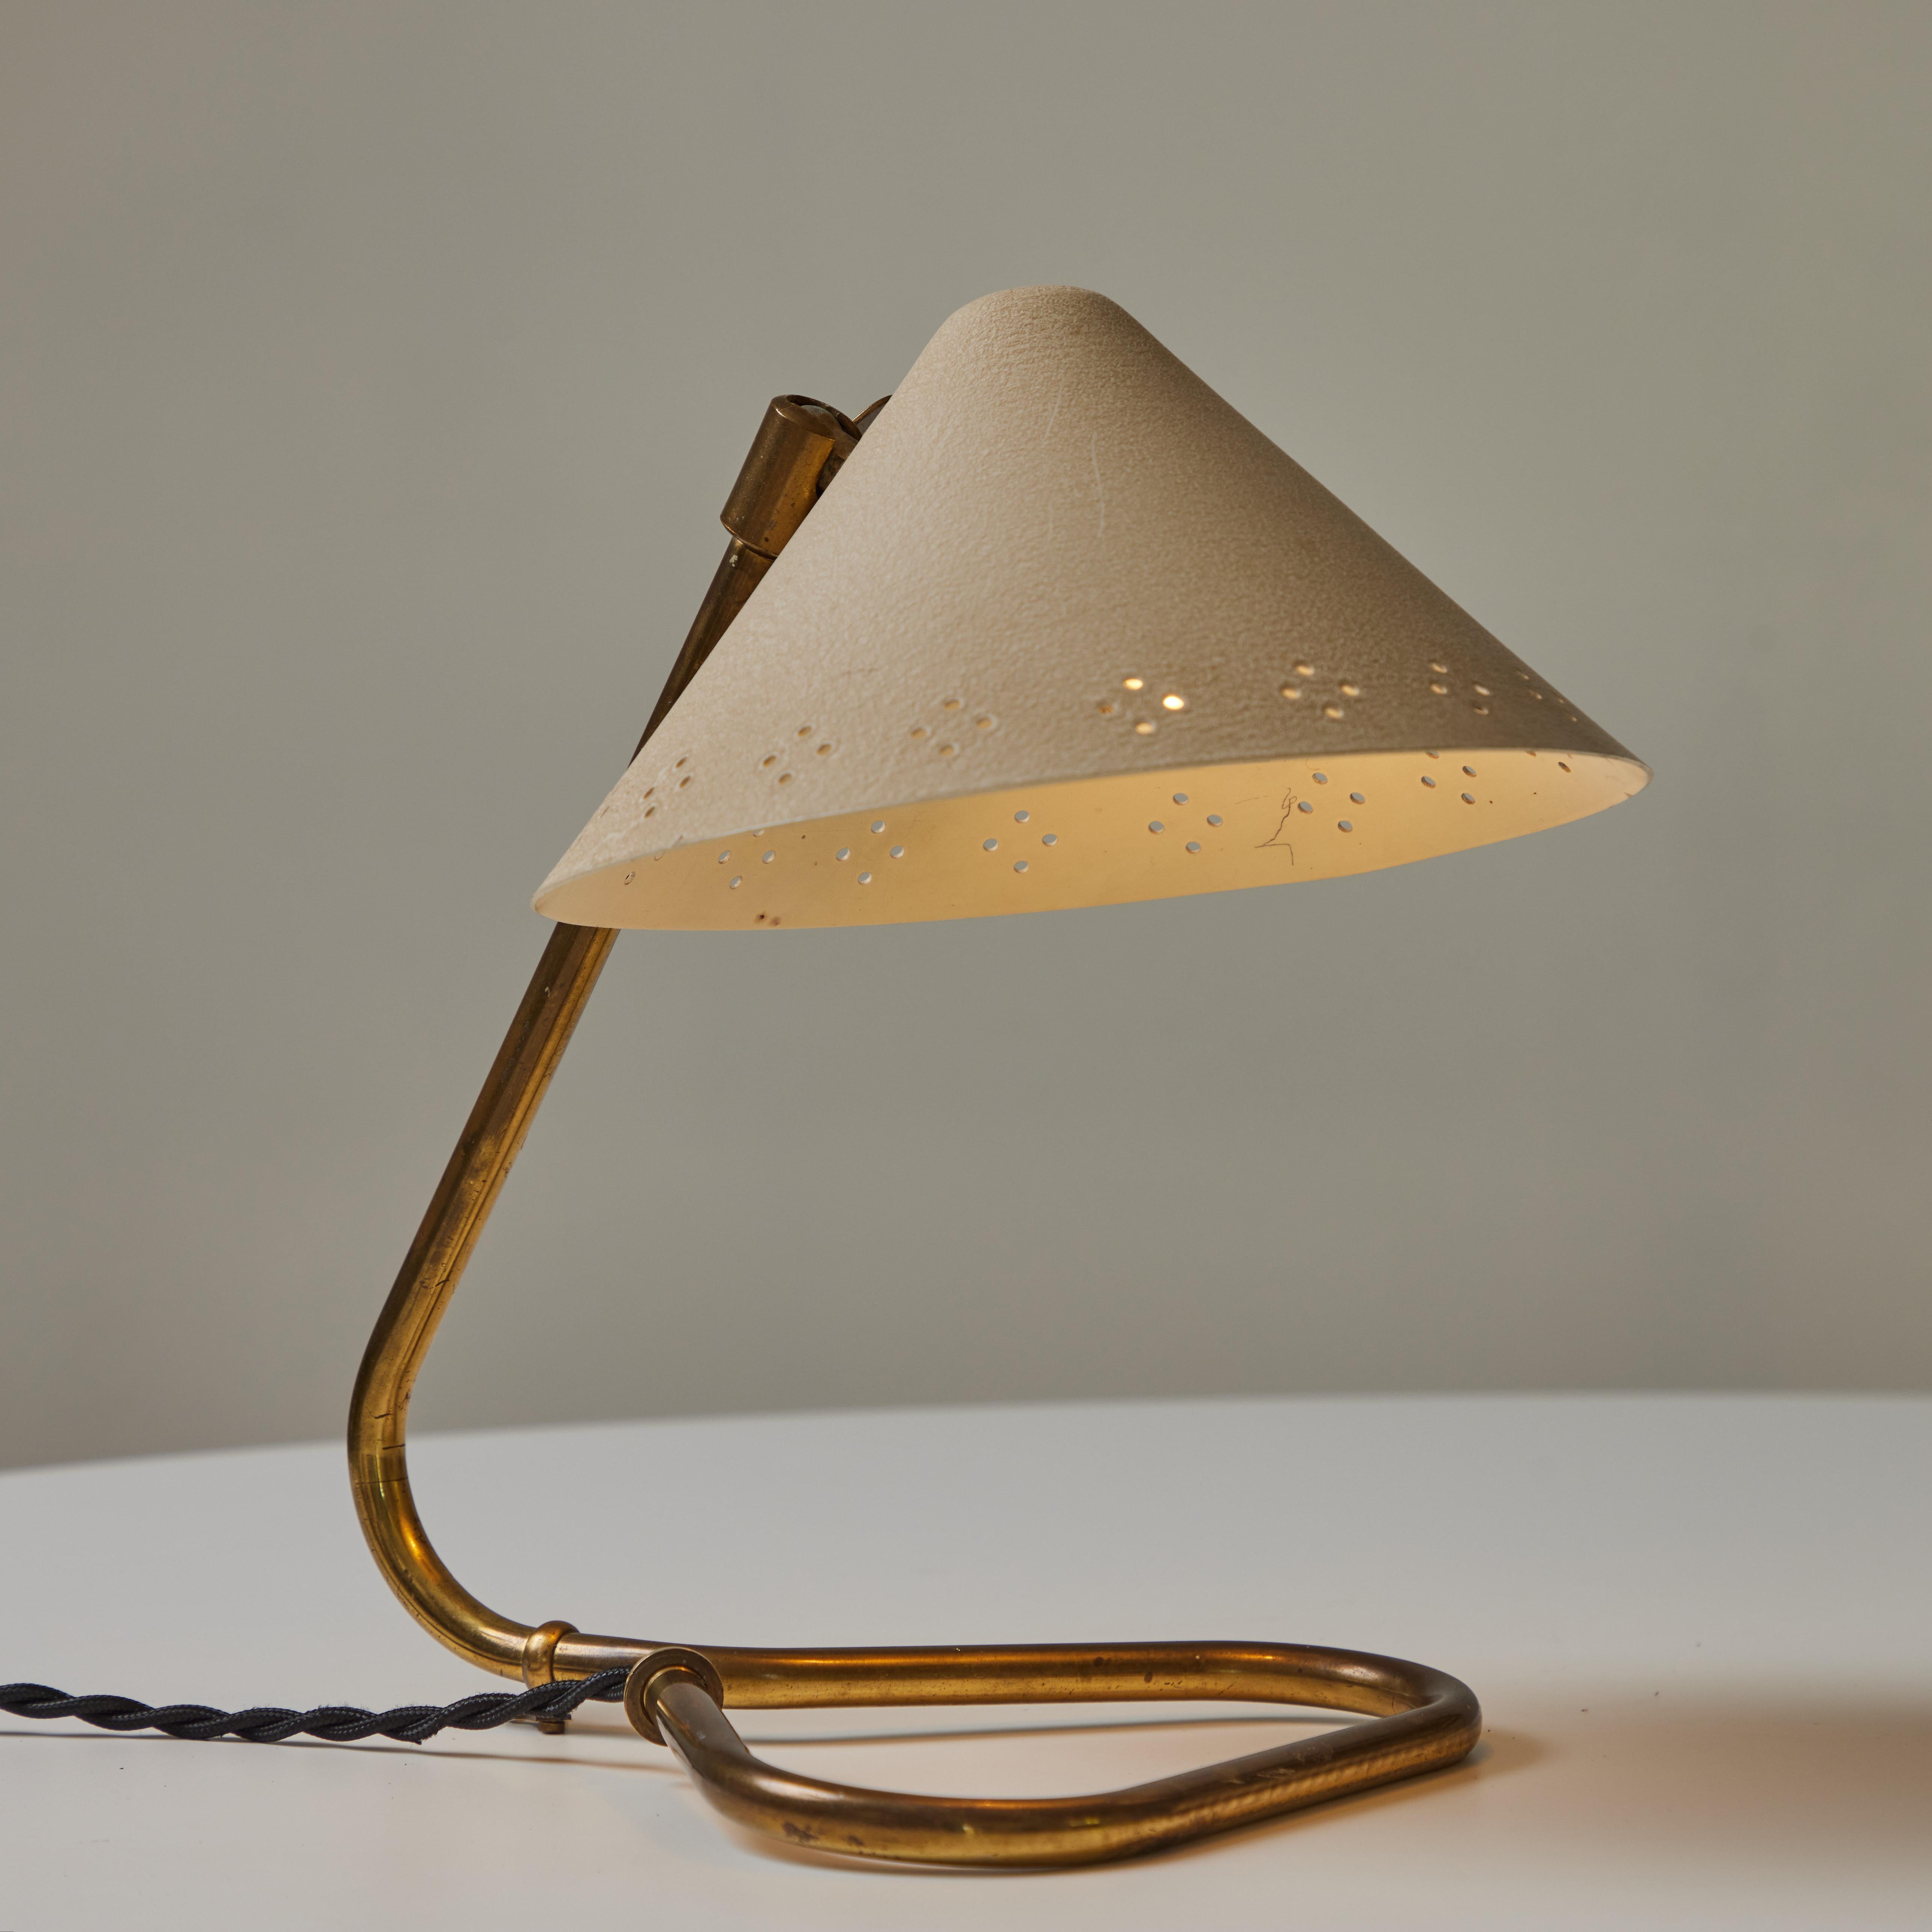 1950s Erik Warna 'GK14' Perforated Shade Table Lamp. Executed in perforated painted metal and patinated brass. Shade is adjustable and can be rotate up or down. Produced by Gnosjö Konstsmide Rydahls in Sweden in the mid-century. A highly refined